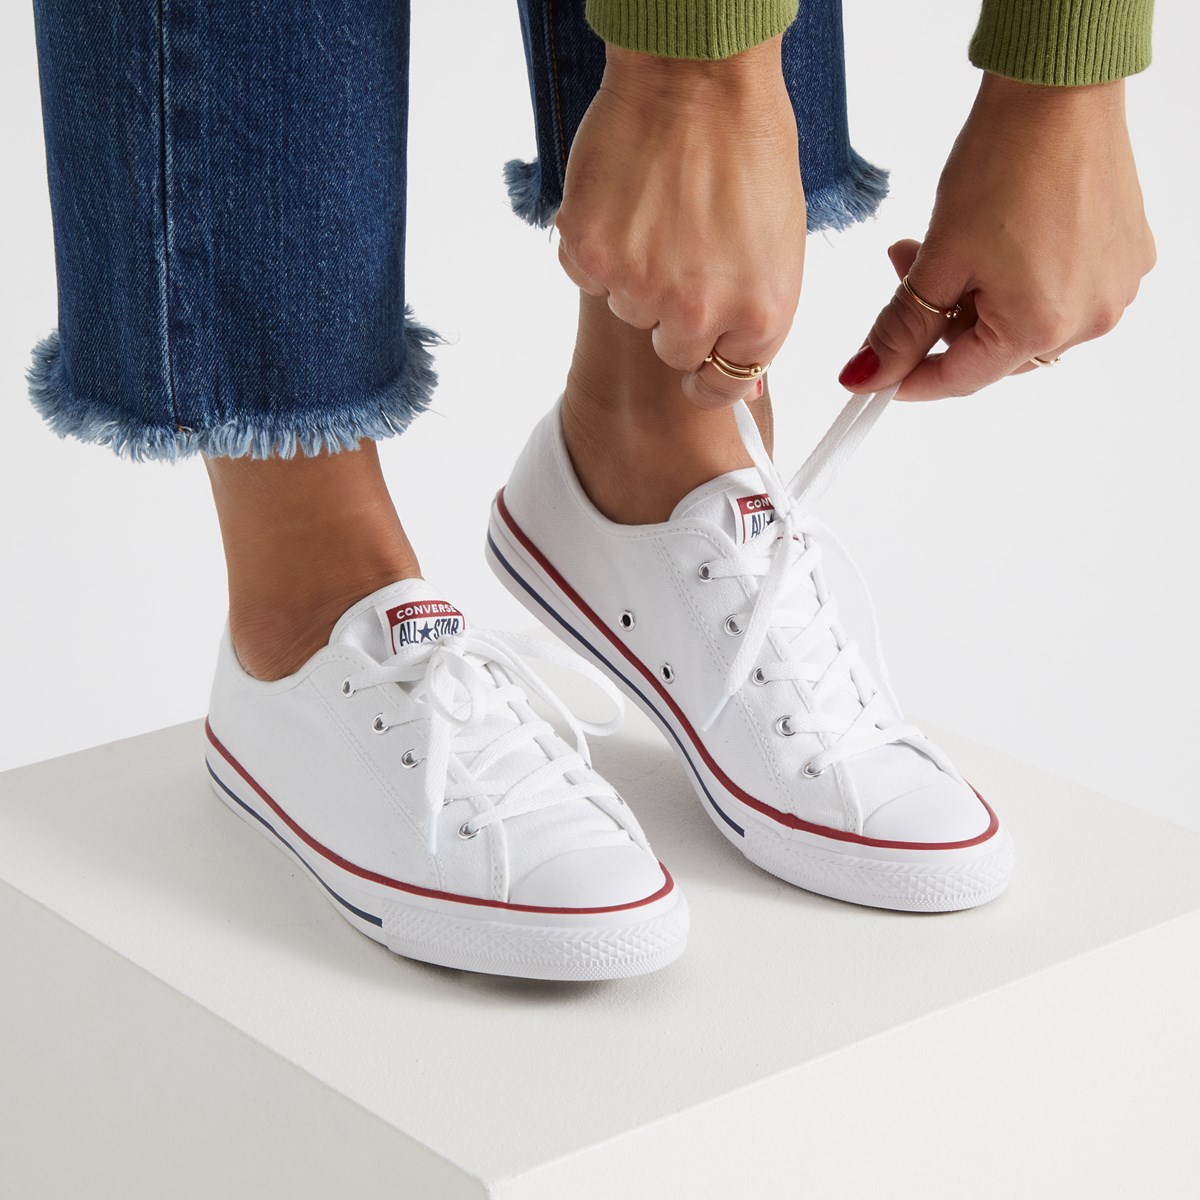 Chuck Taylor All Star Dainty Sneakers 